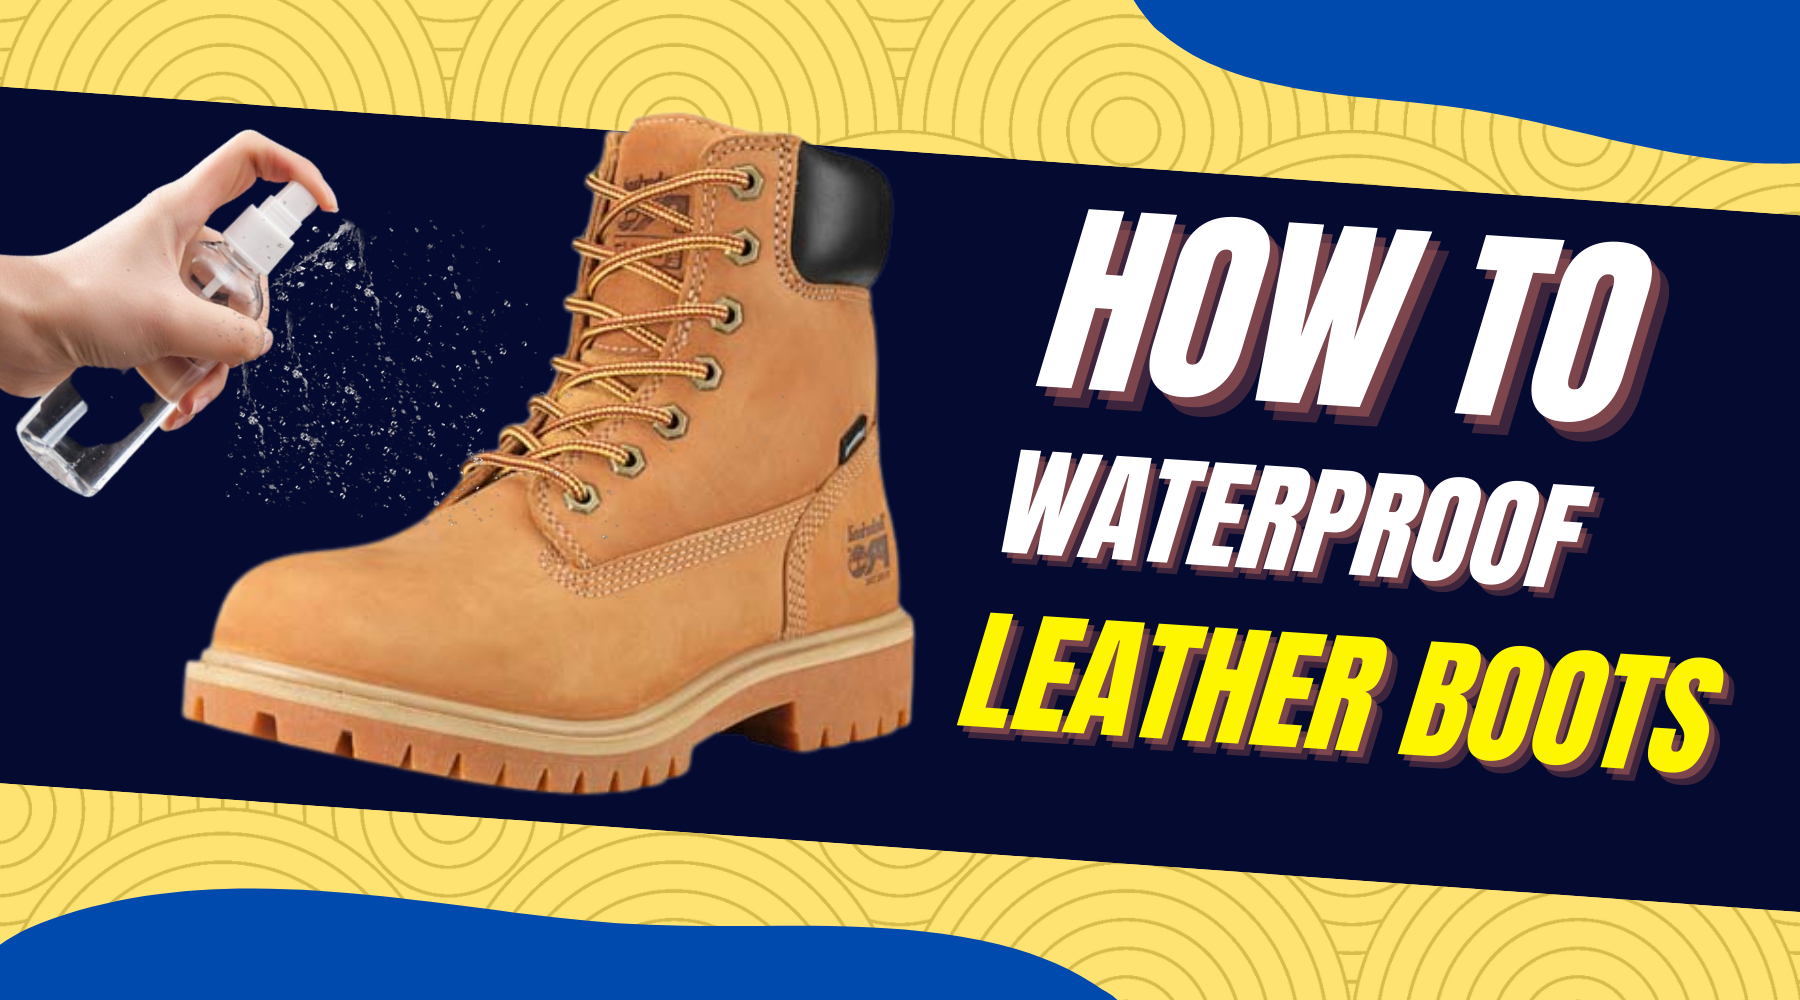 How To Waterproof Leather Boots